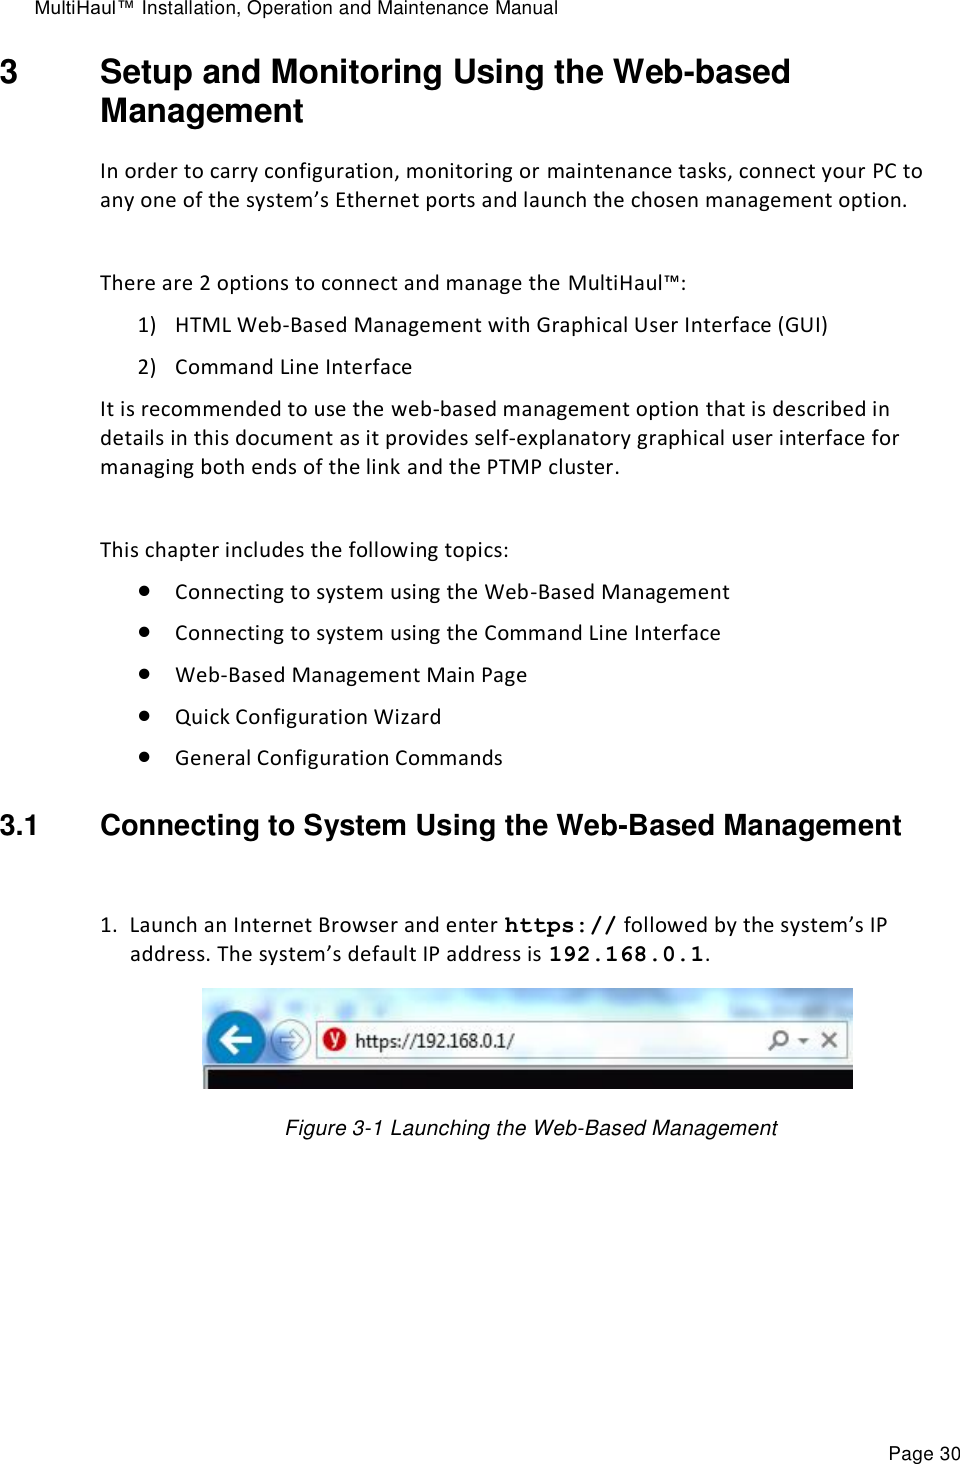 MultiHaul™ Installation, Operation and Maintenance Manual Page 30 3  Setup and Monitoring Using the Web-based Management In order to carry configuration, monitoring or maintenance tasks, connect your PC to any one of the system’s Ethernet ports and launch the chosen management option.  There are 2 options to connect and manage the MultiHaul™: 1) HTML Web-Based Management with Graphical User Interface (GUI) 2) Command Line Interface It is recommended to use the web-based management option that is described in details in this document as it provides self-explanatory graphical user interface for managing both ends of the link and the PTMP cluster.  This chapter includes the following topics:  Connecting to system using the Web-Based Management  Connecting to system using the Command Line Interface  Web-Based Management Main Page  Quick Configuration Wizard  General Configuration Commands 3.1  Connecting to System Using the Web-Based Management  1. Launch an Internet Browser and enter https:// followed by the system’s IP address. The system’s default IP address is 192.168.0.1.    Figure 3-1 Launching the Web-Based Management  